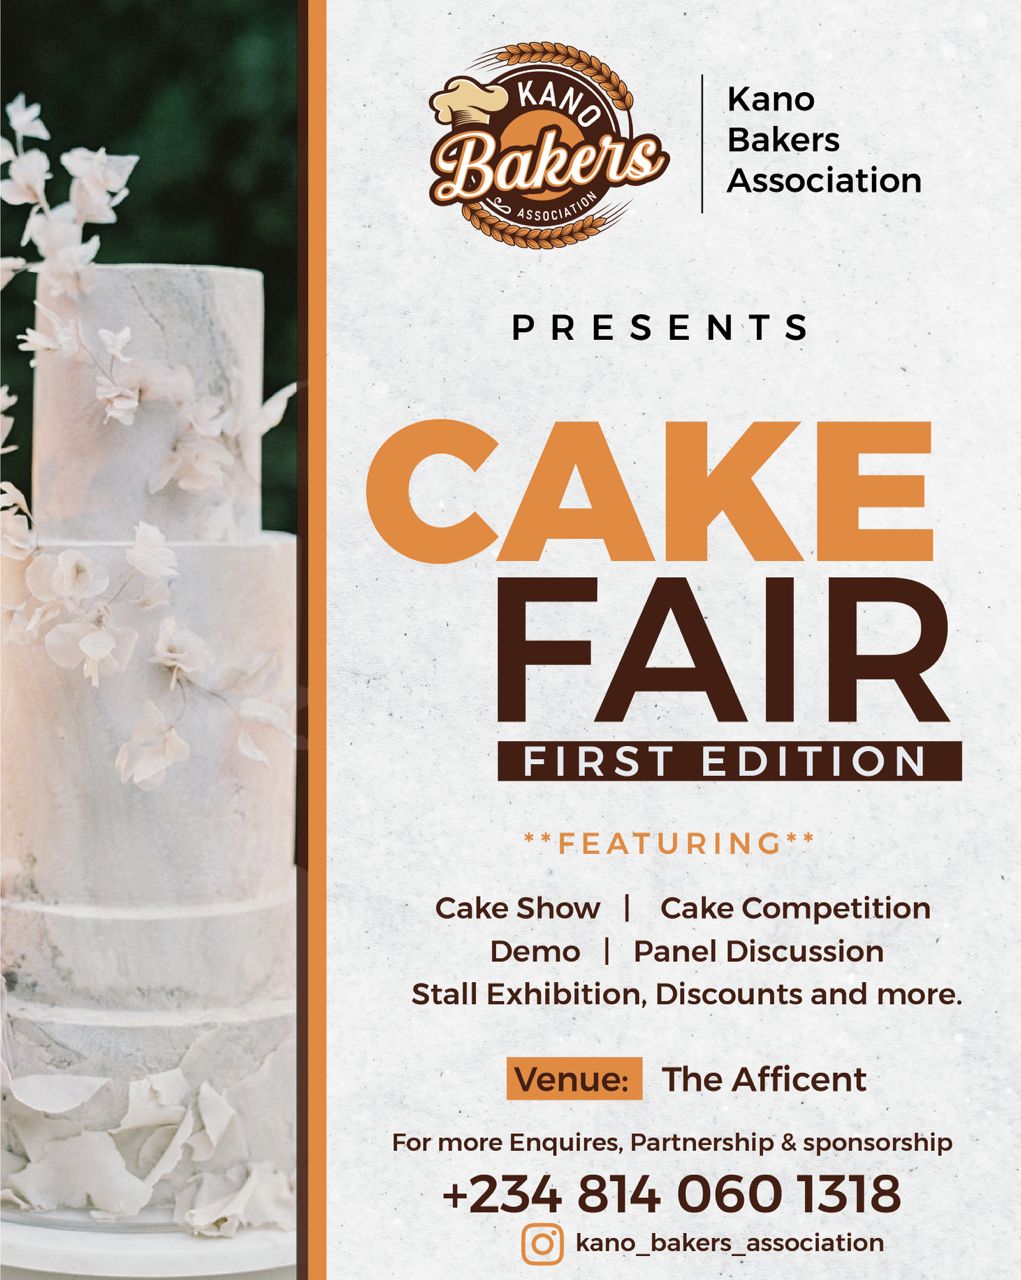 Kano Cake Fair Post free event in Nigeria using tickethub.ng, buy and sell tickets to event